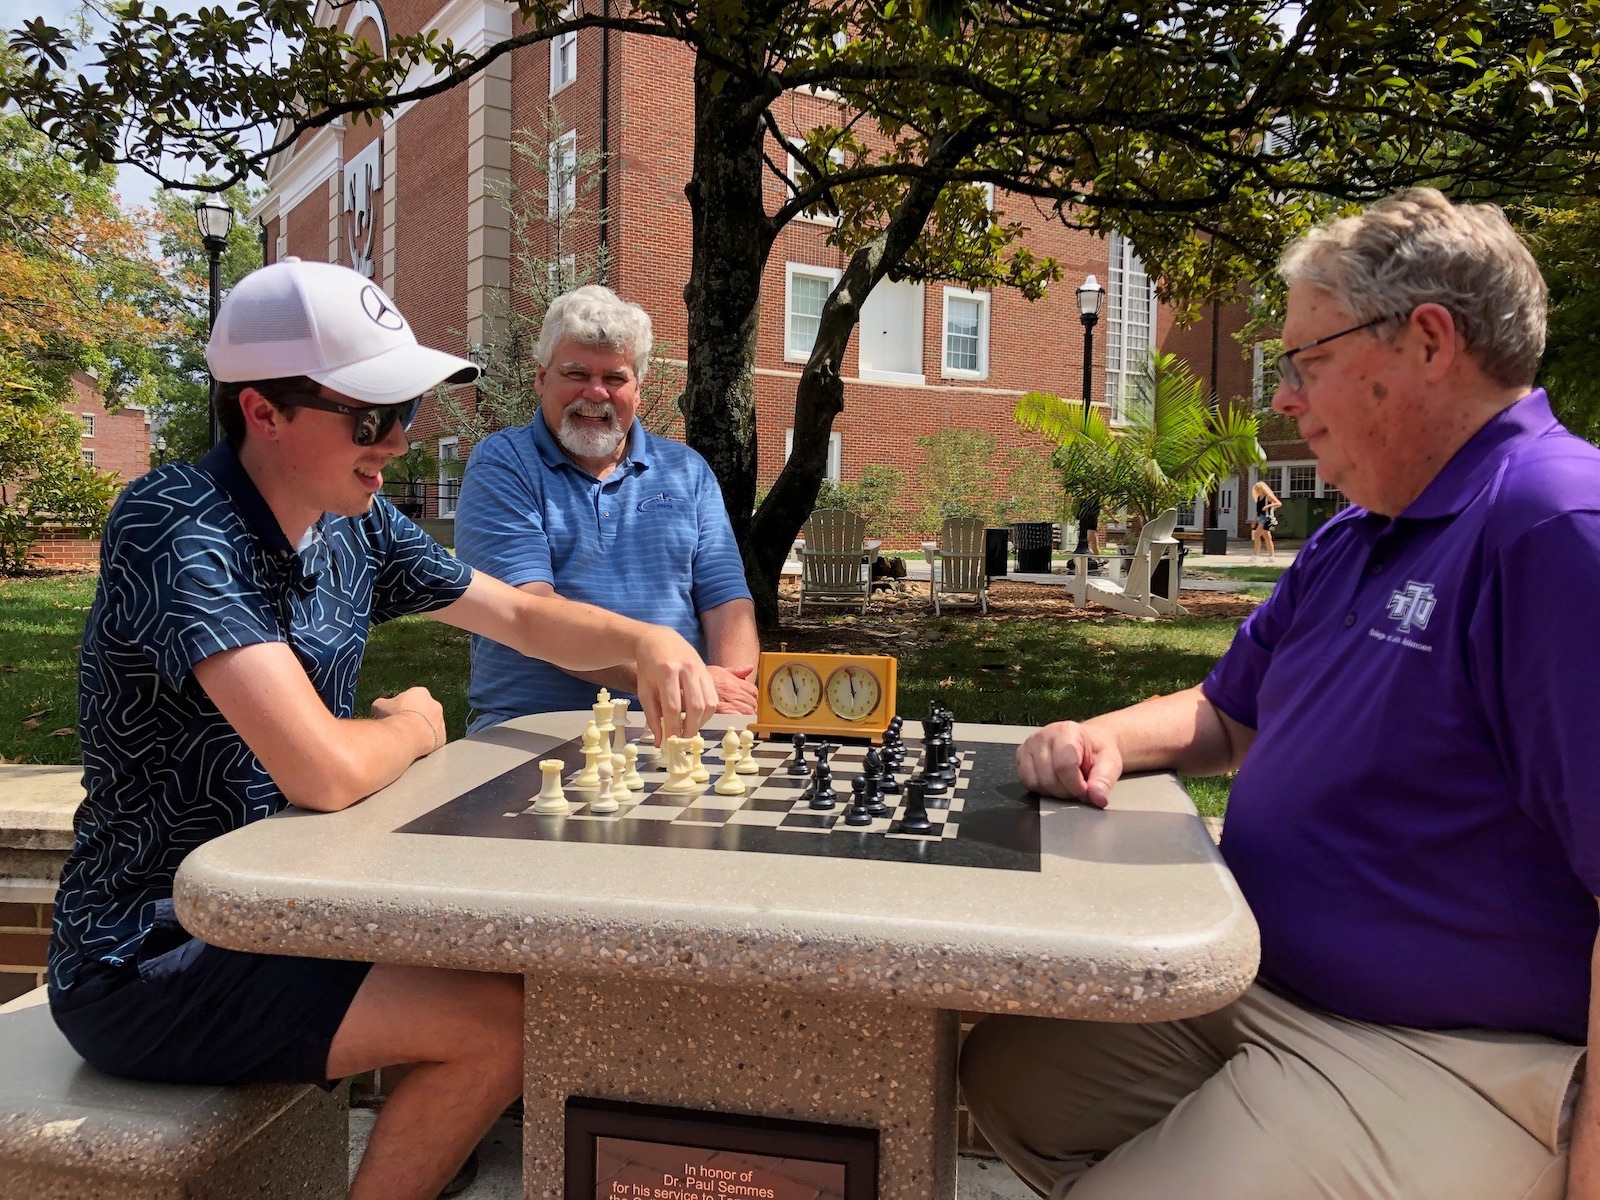 Dean Semmes and a member of the chess club play at the table while Dean Roberts watches on.